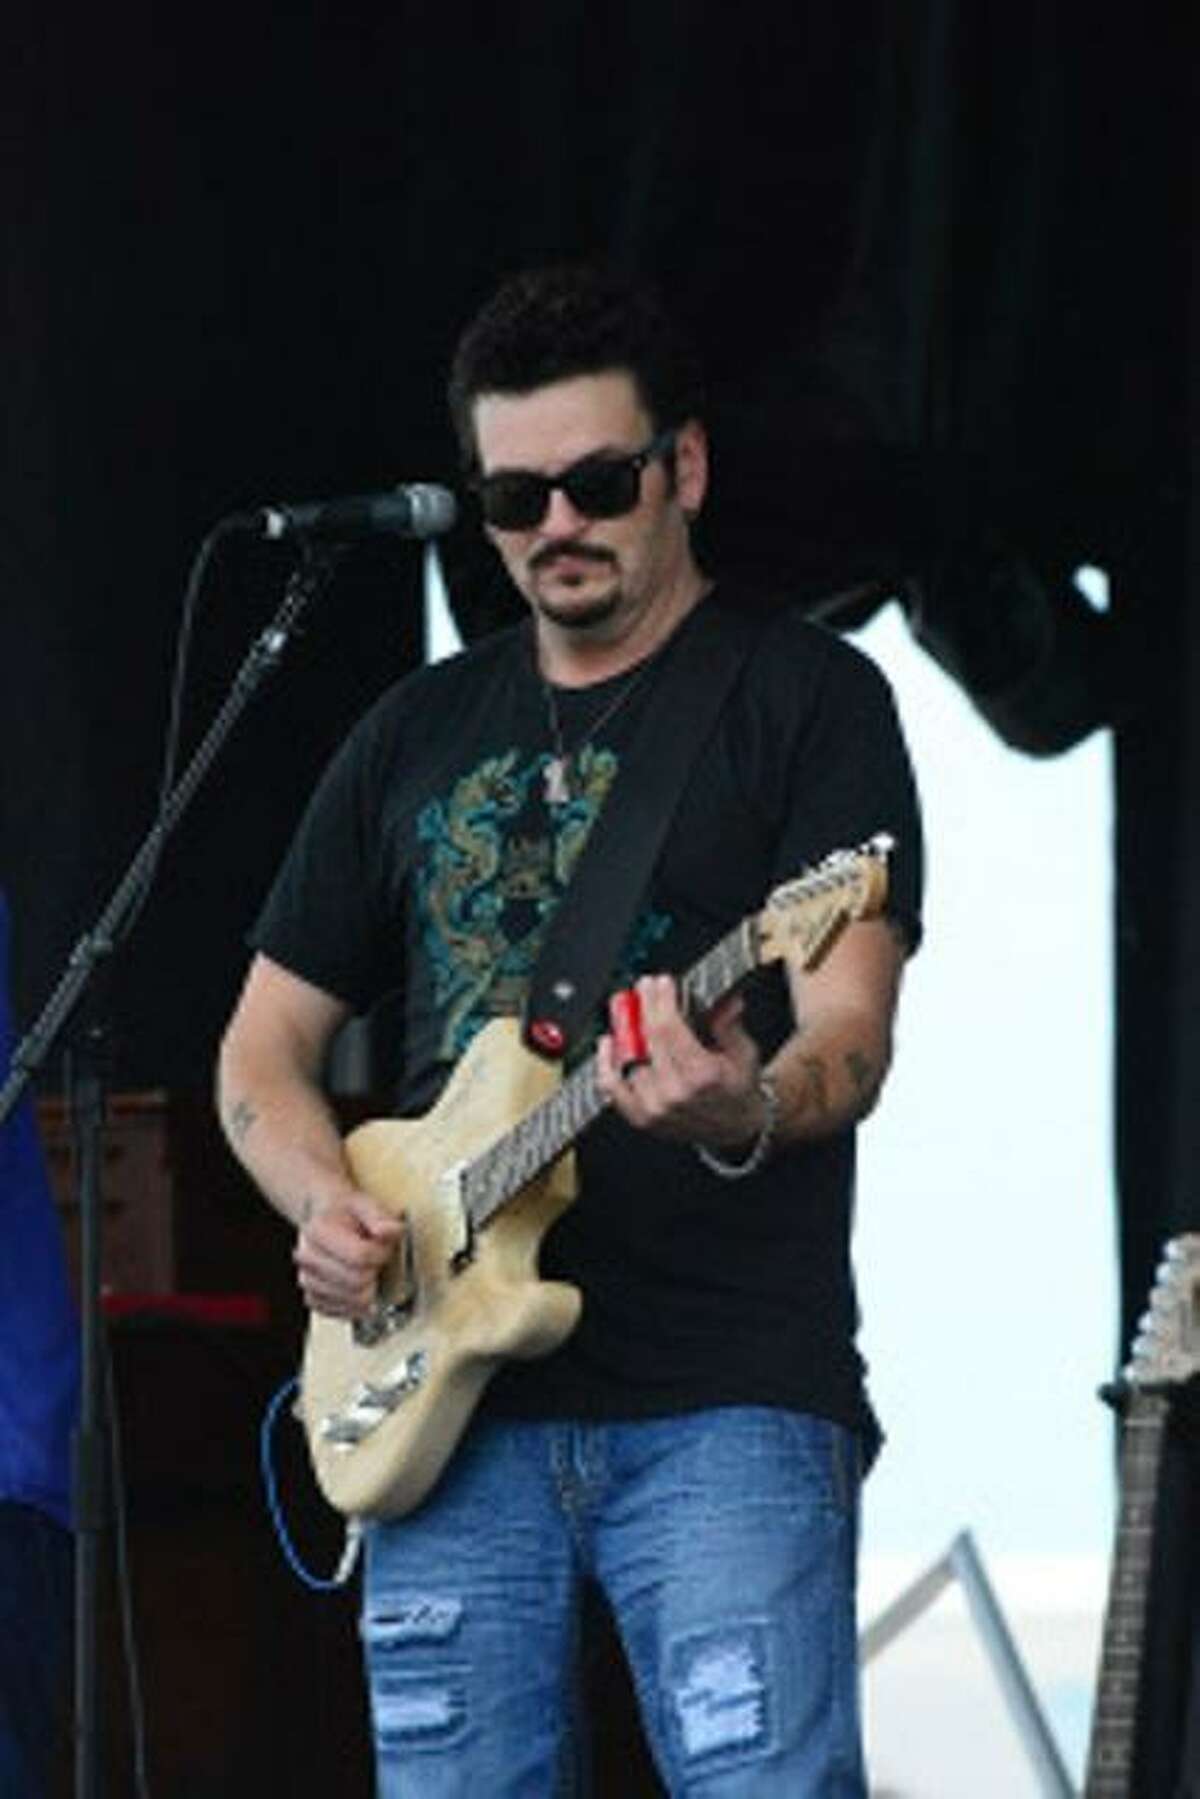 American blues artist Mike Zito and his band return to the Bridge Street Live stage on Friday.